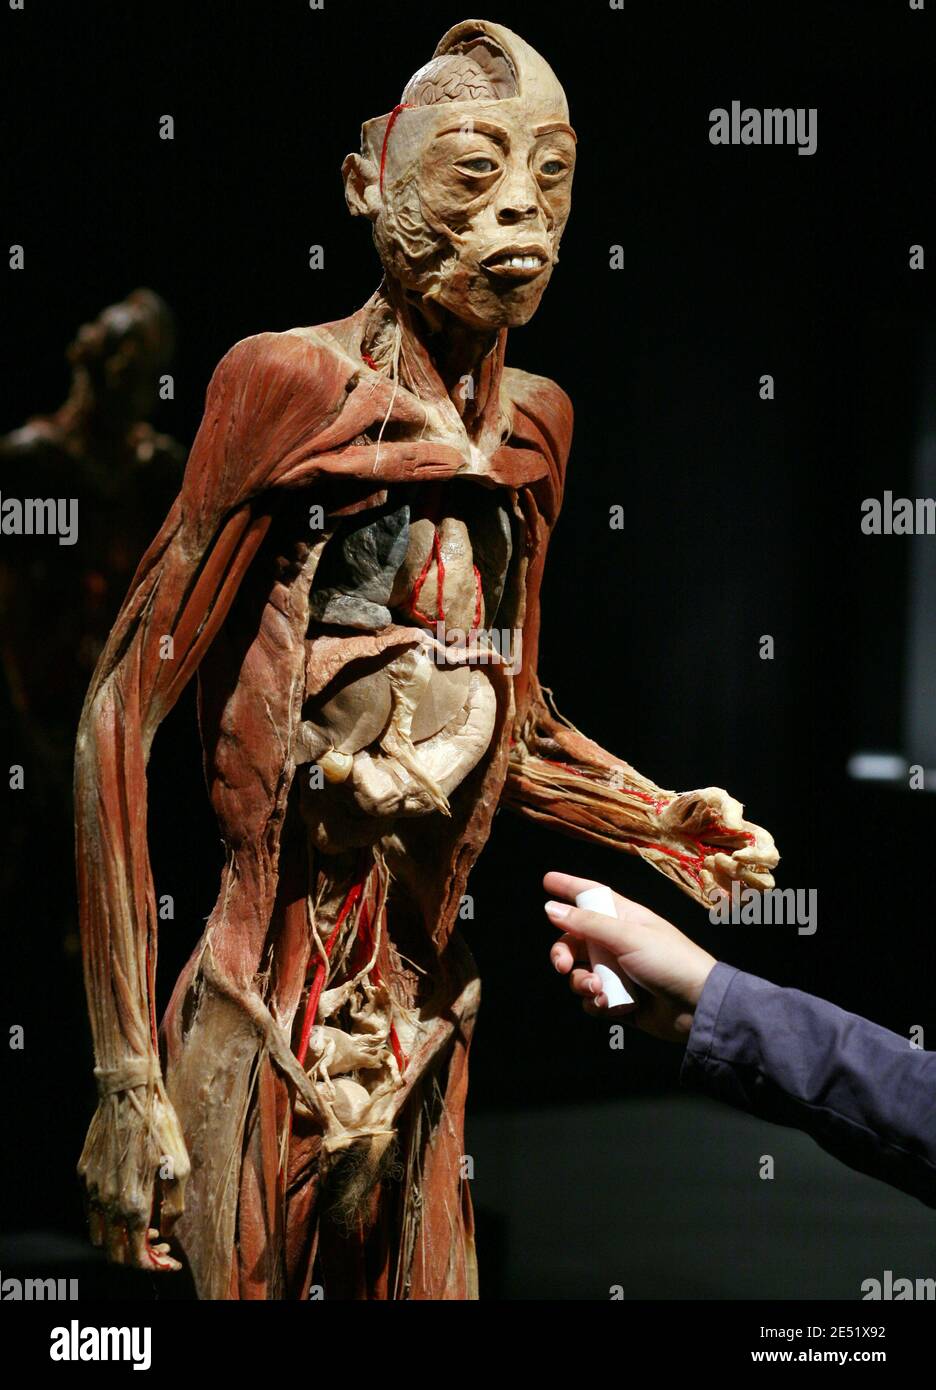 Our Body exhibition in Lyon, France on May 29, 2008. Consisting of actual  human bodies and organs this exhibit literally goes ""under the skin"",  revealing the mysteries of the human anatomy. The